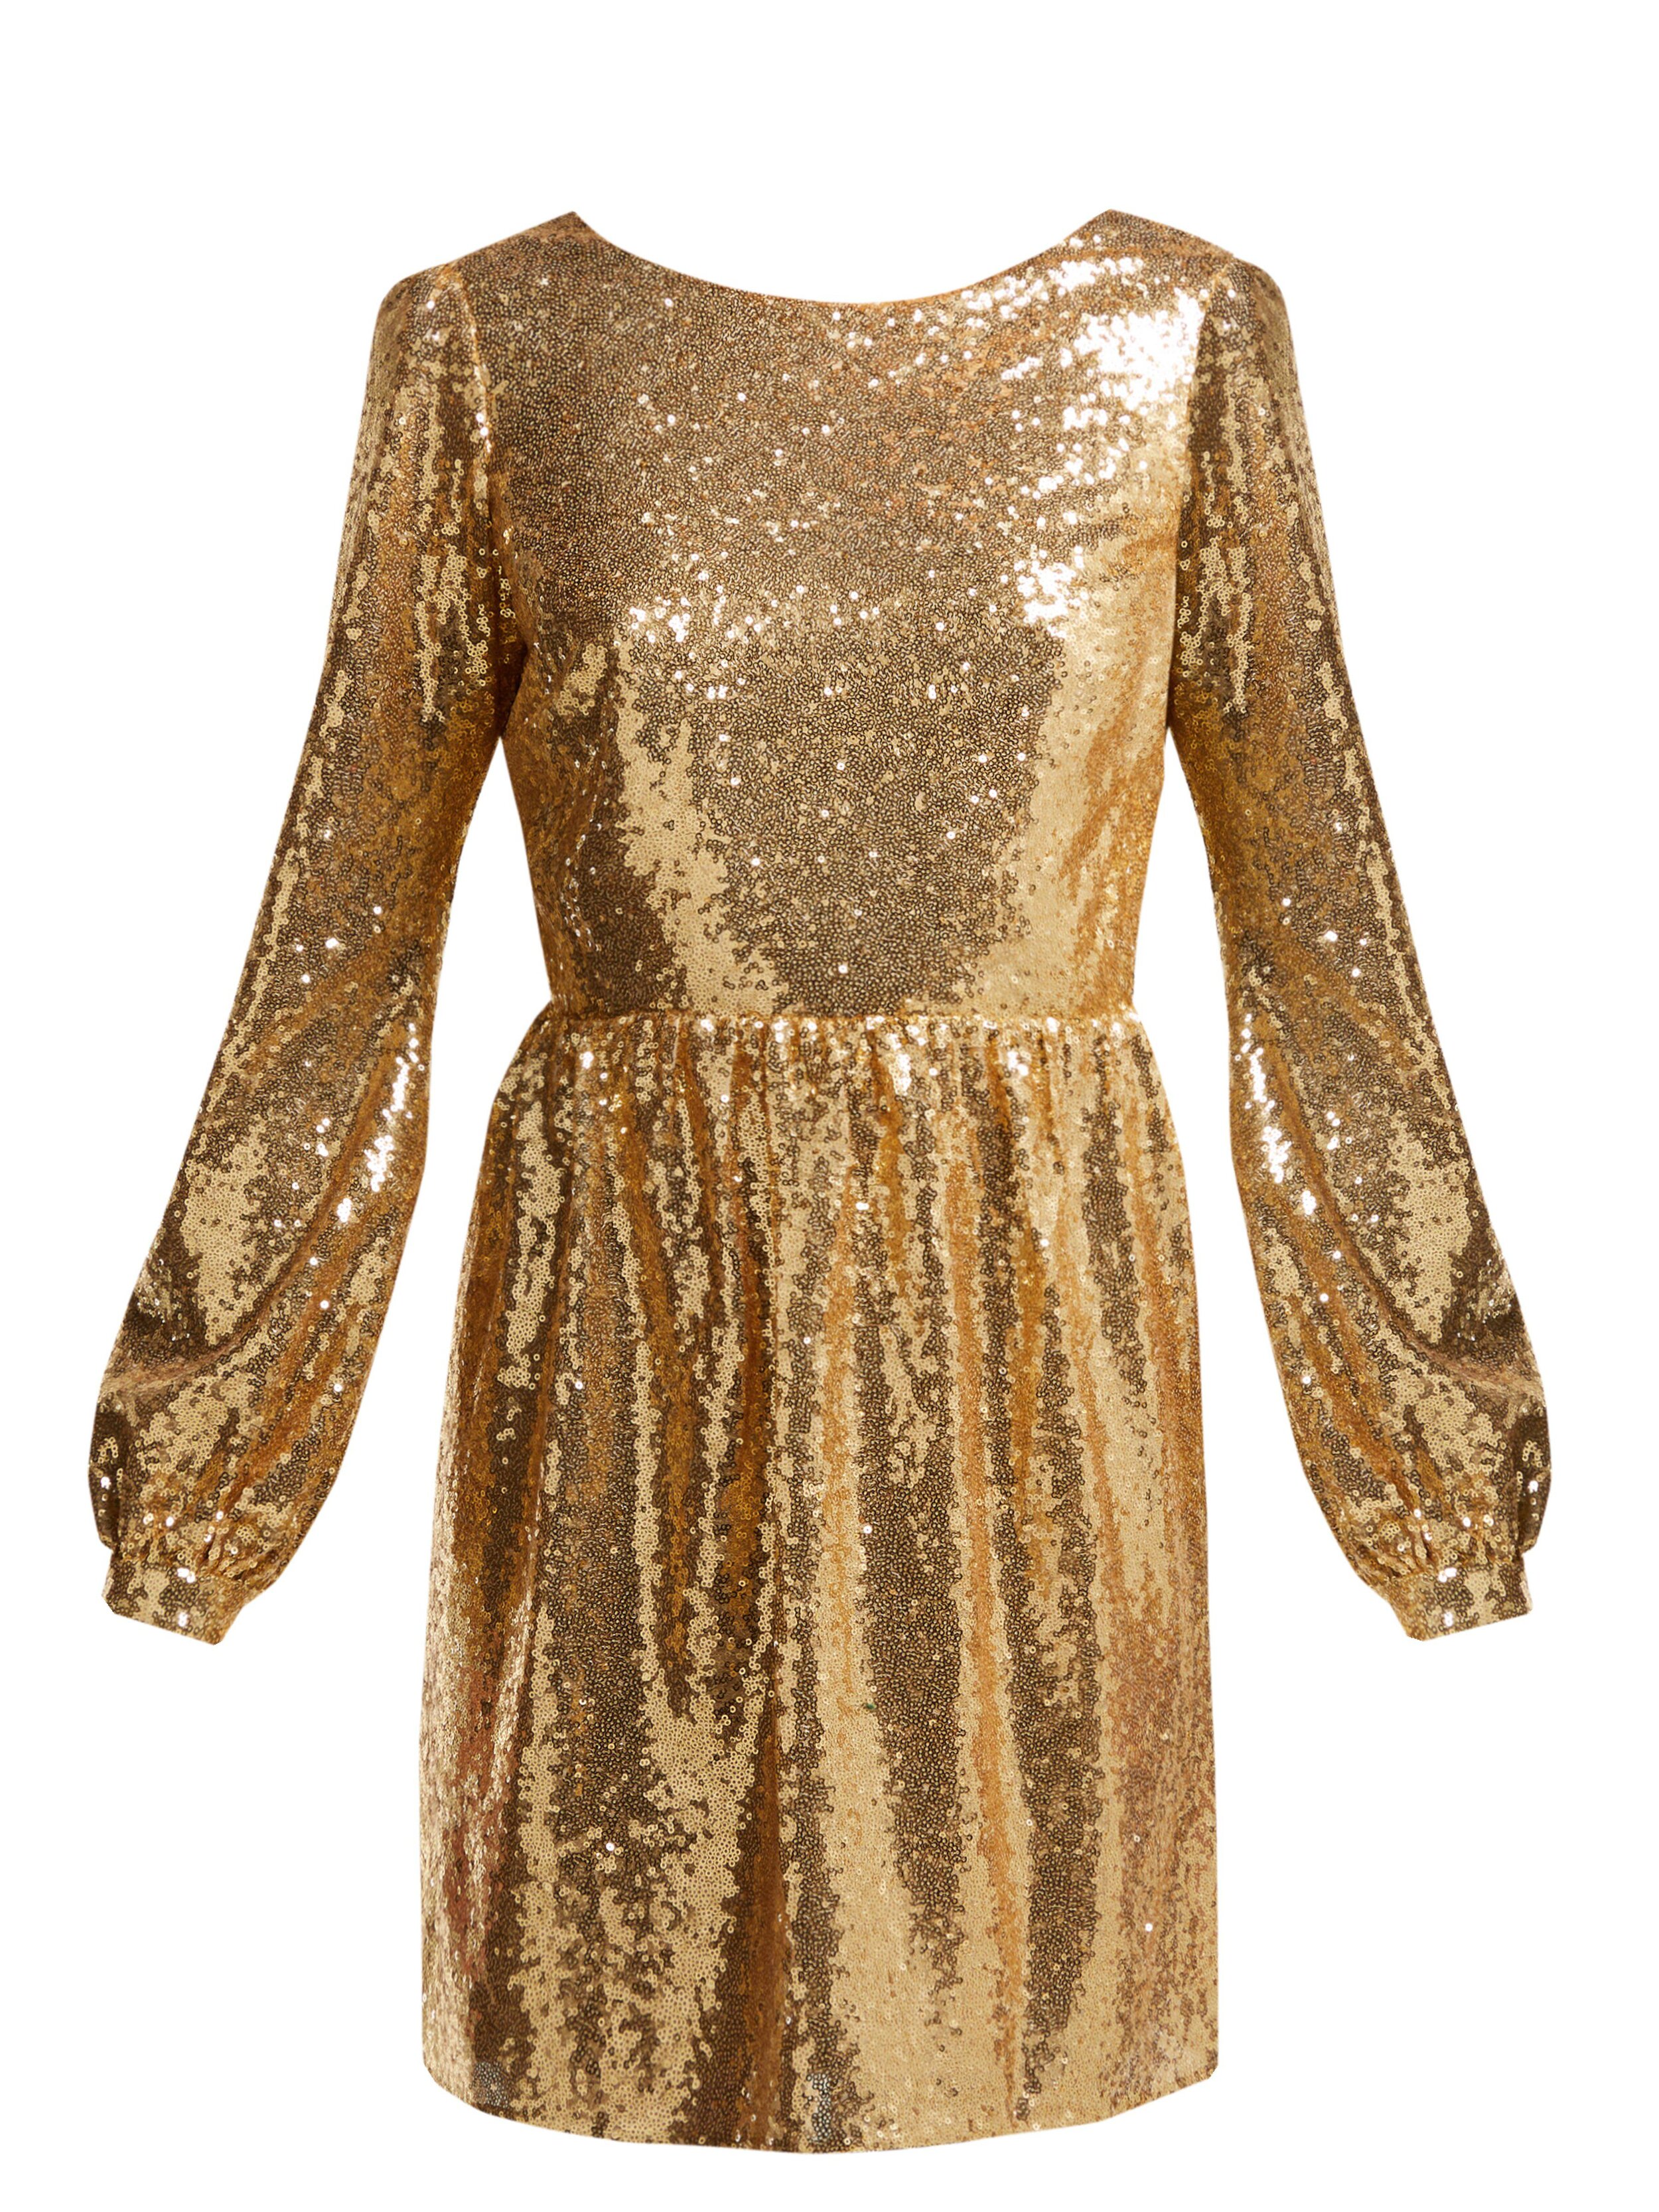 Saloni Camille Sequinned Dress in Gold.jpg